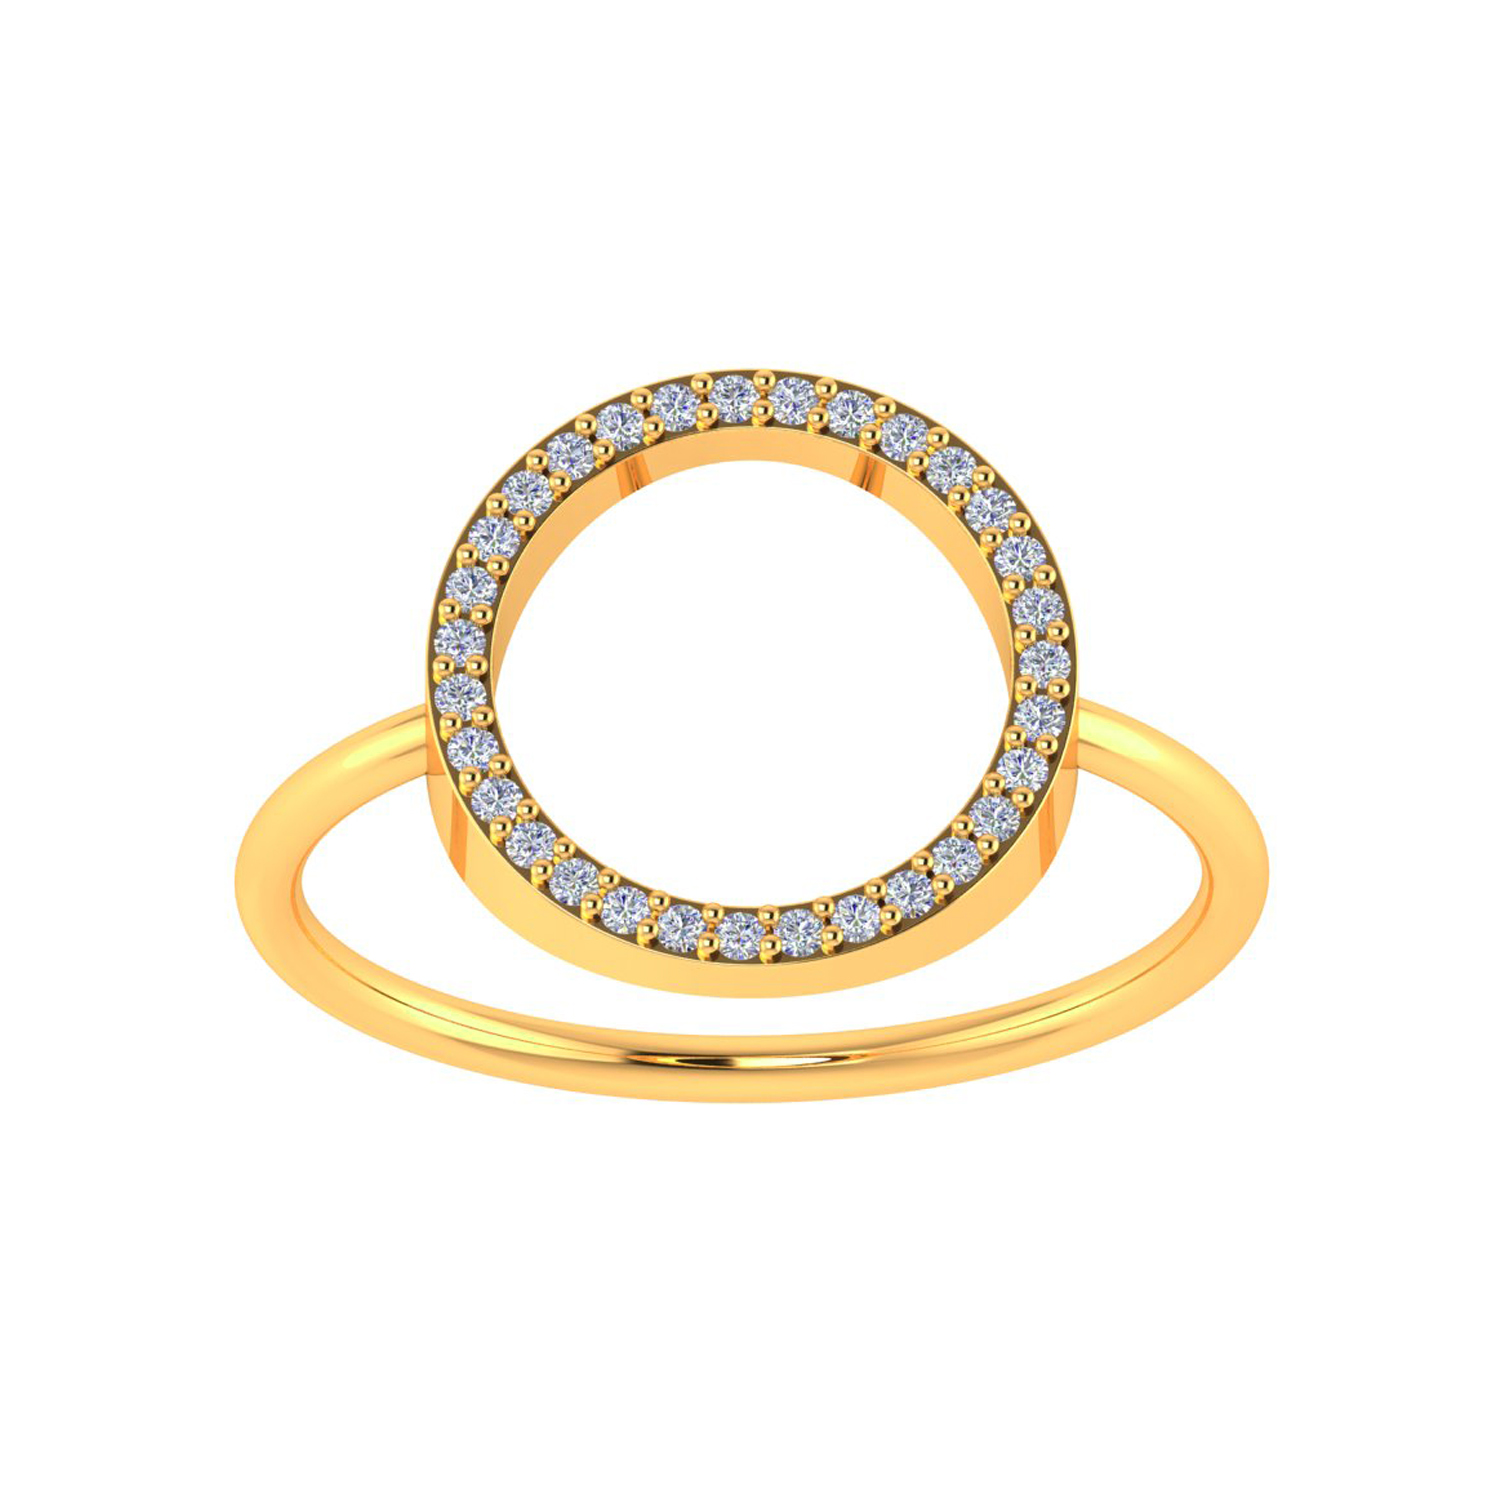 Solid Gold Real Diamond Ring Designer Jewelry